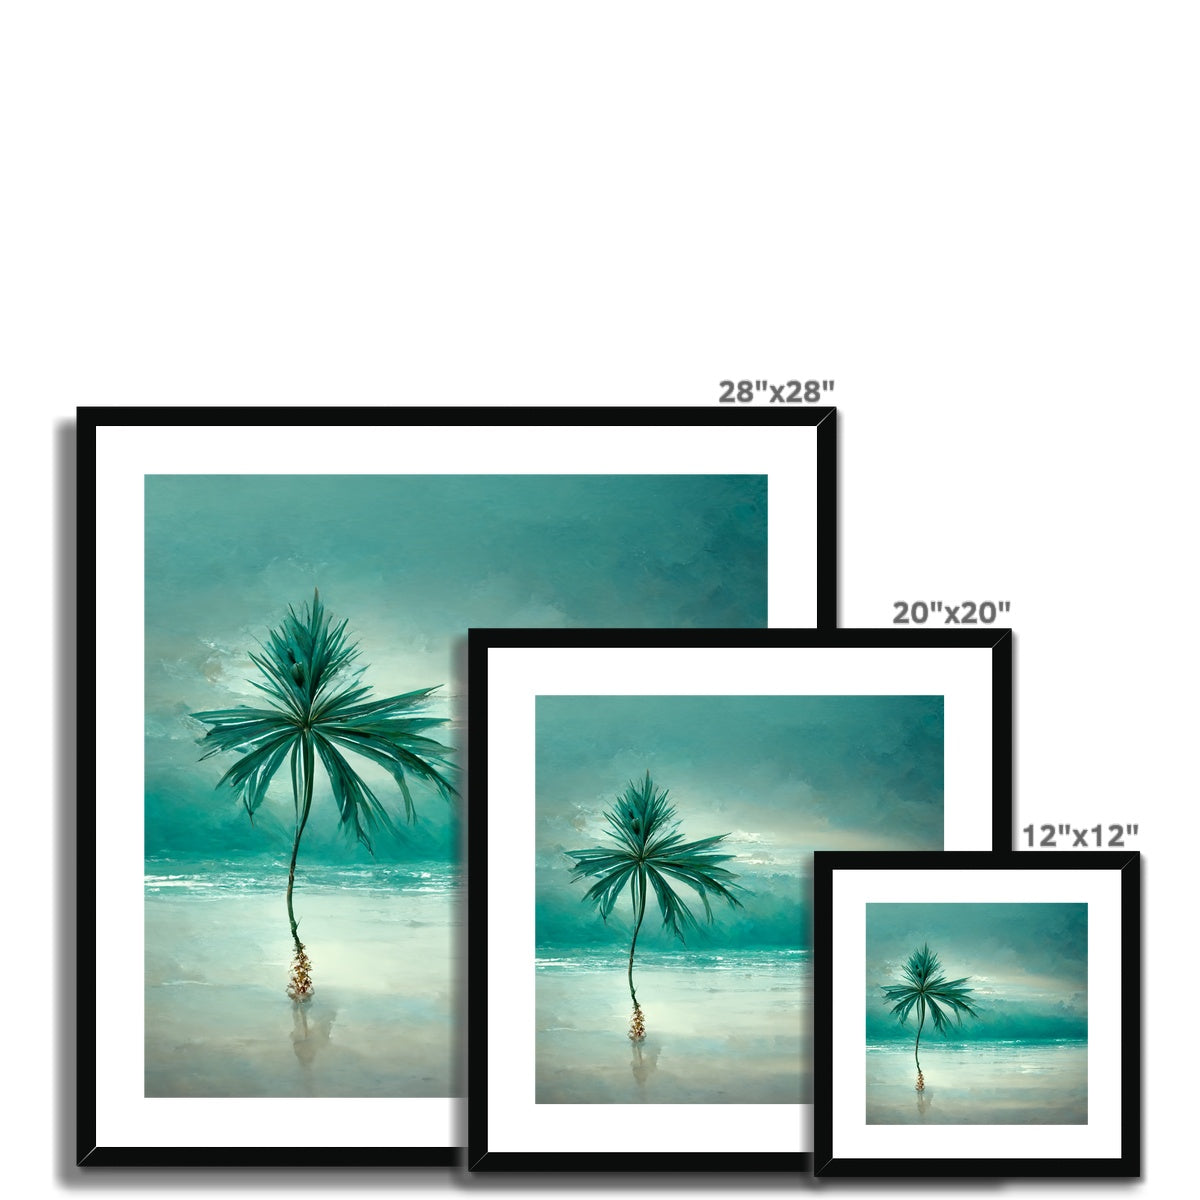 Lonesome Palm Framed & Mounted Print